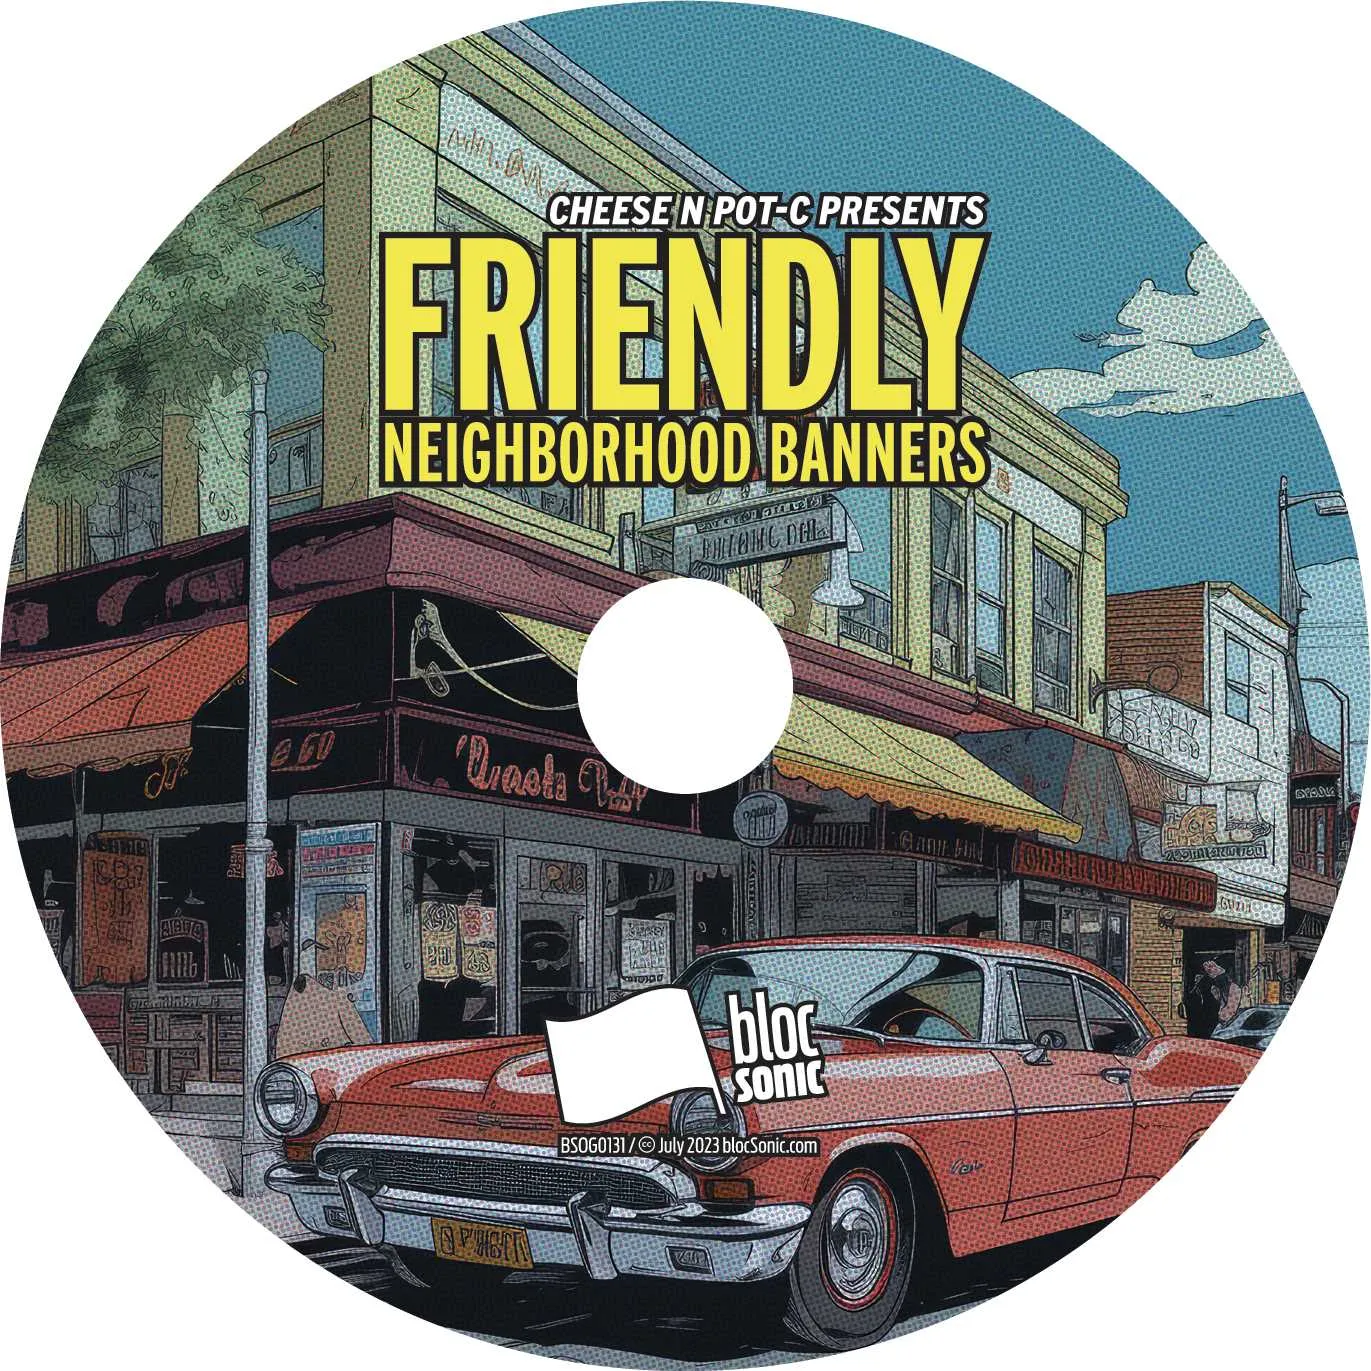 Album disc for “Friendly Neighborhood Banners” by Cheese N Pot-C